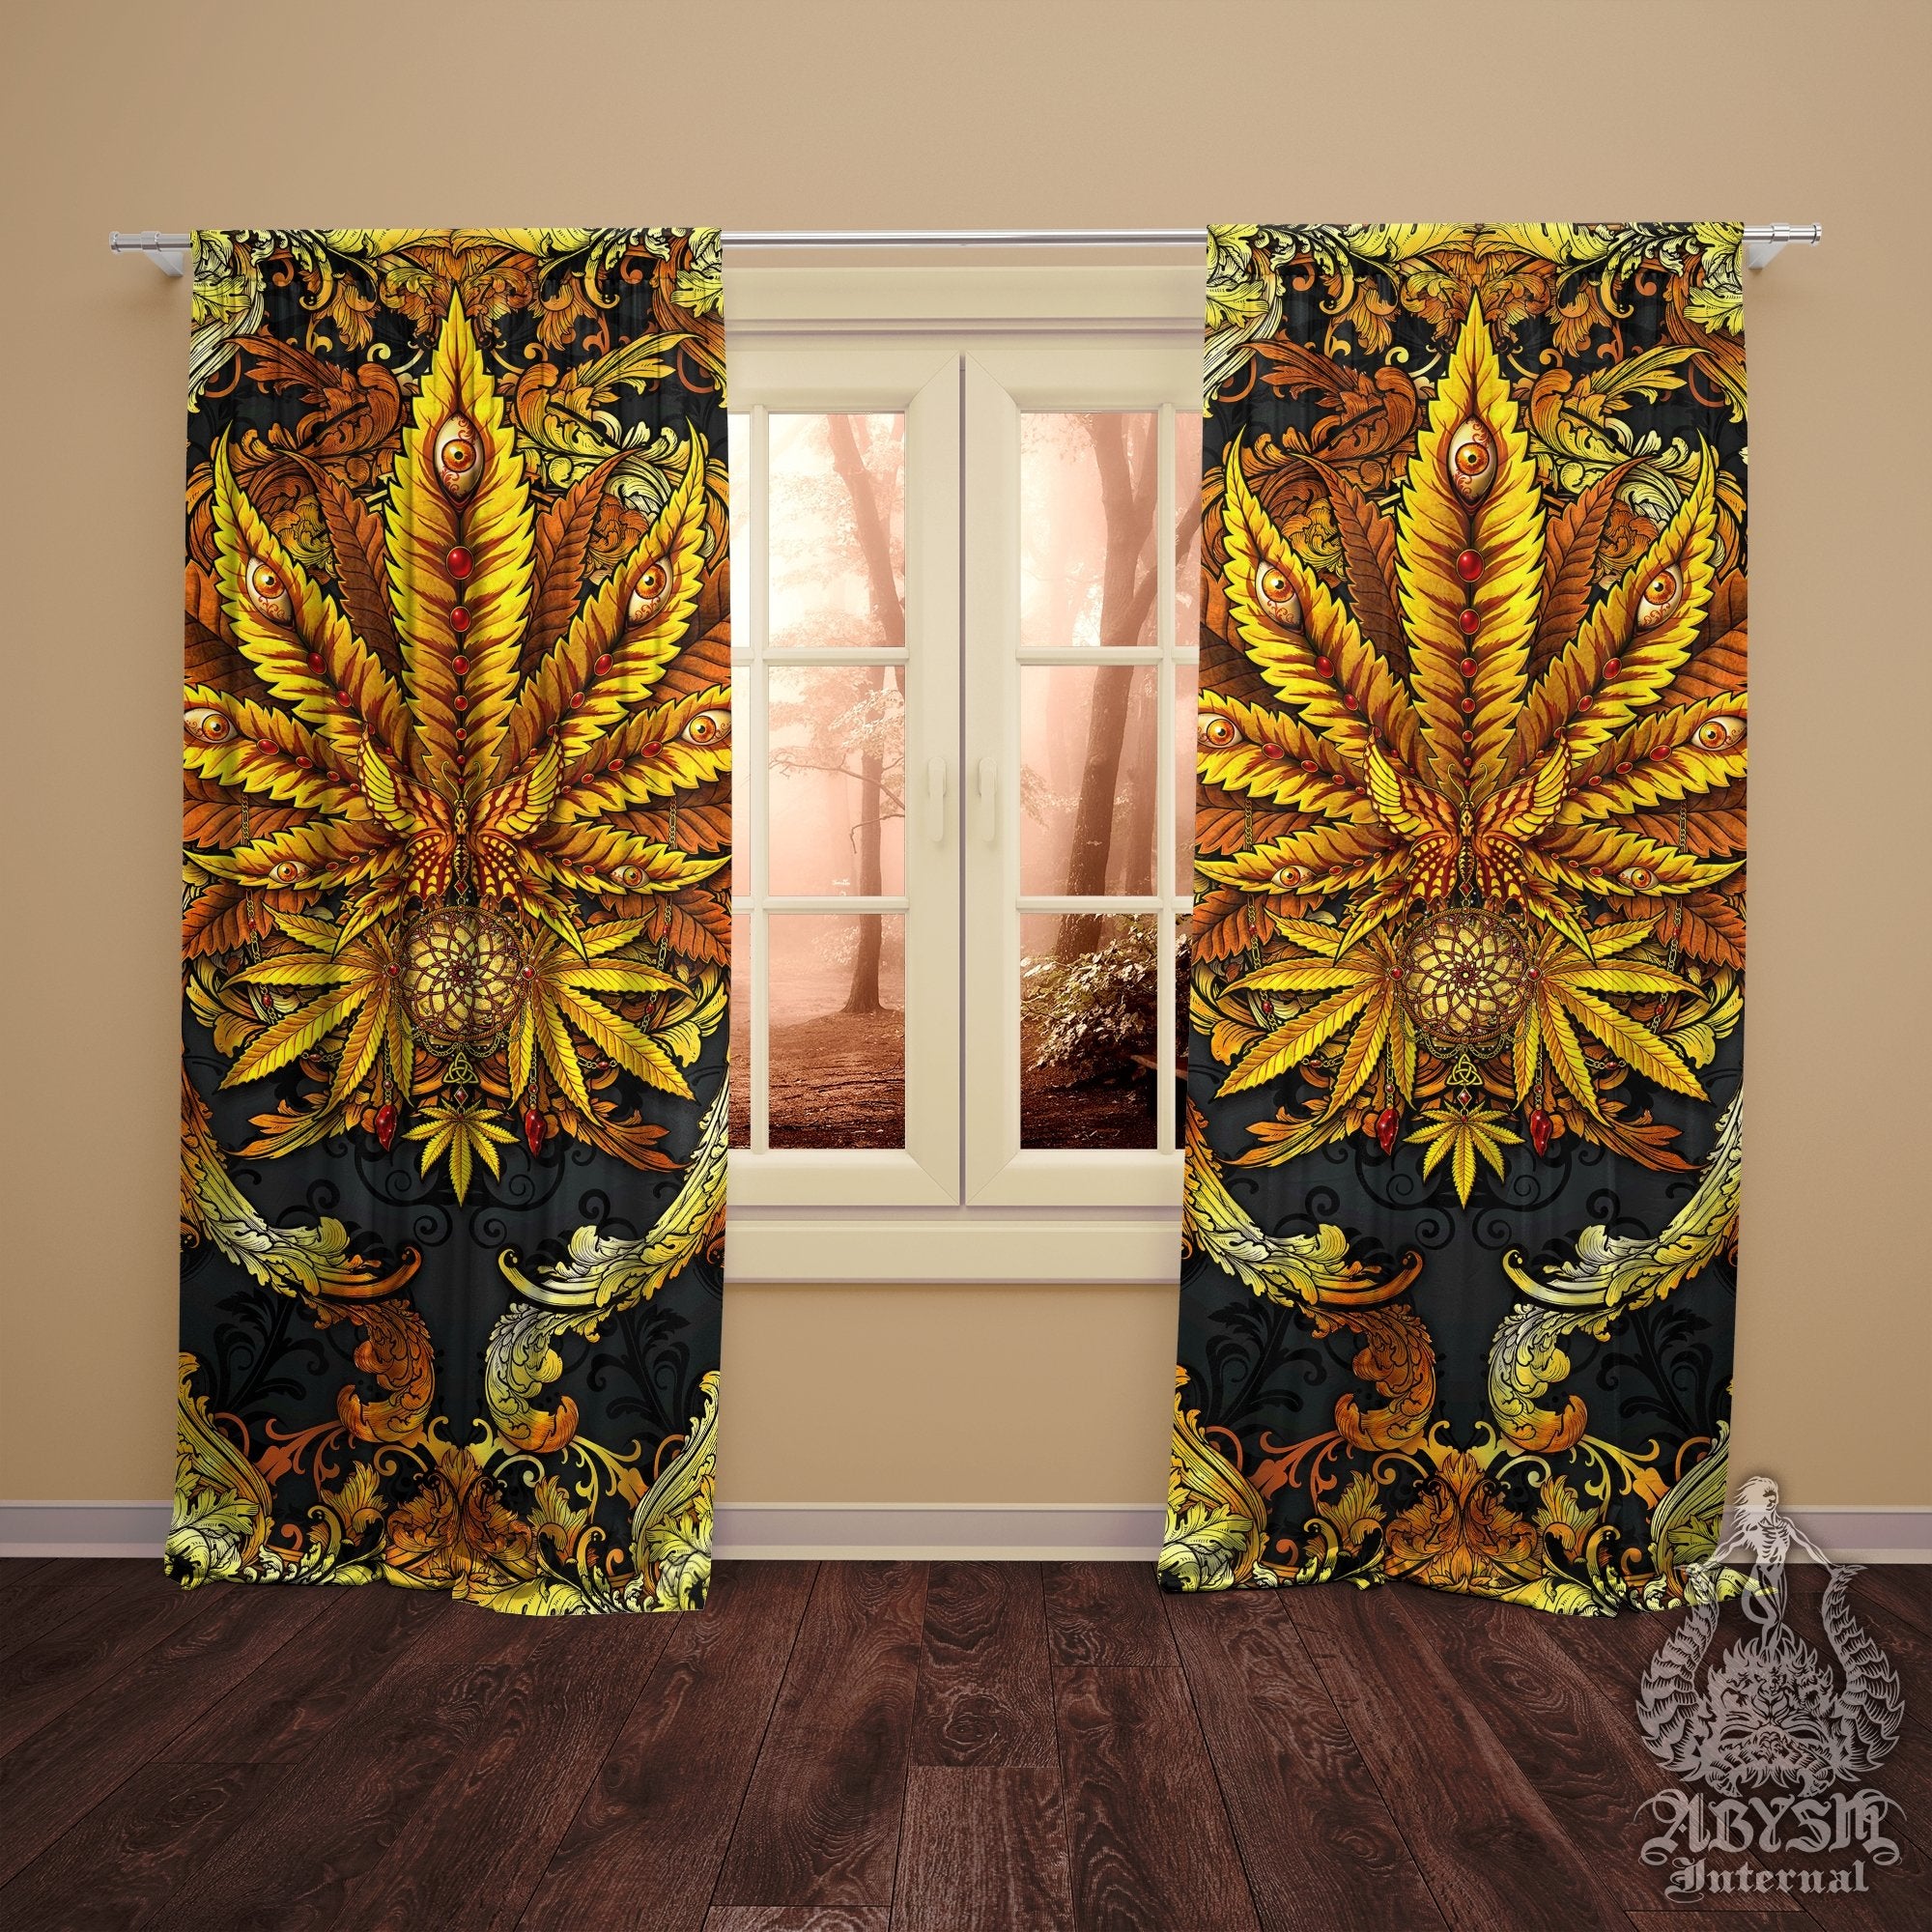 Weed Blackout Curtains, Cannabis Home and Shop Decor, Long Window Panels, Indie 420 Room Art Print - Gold - Abysm Internal